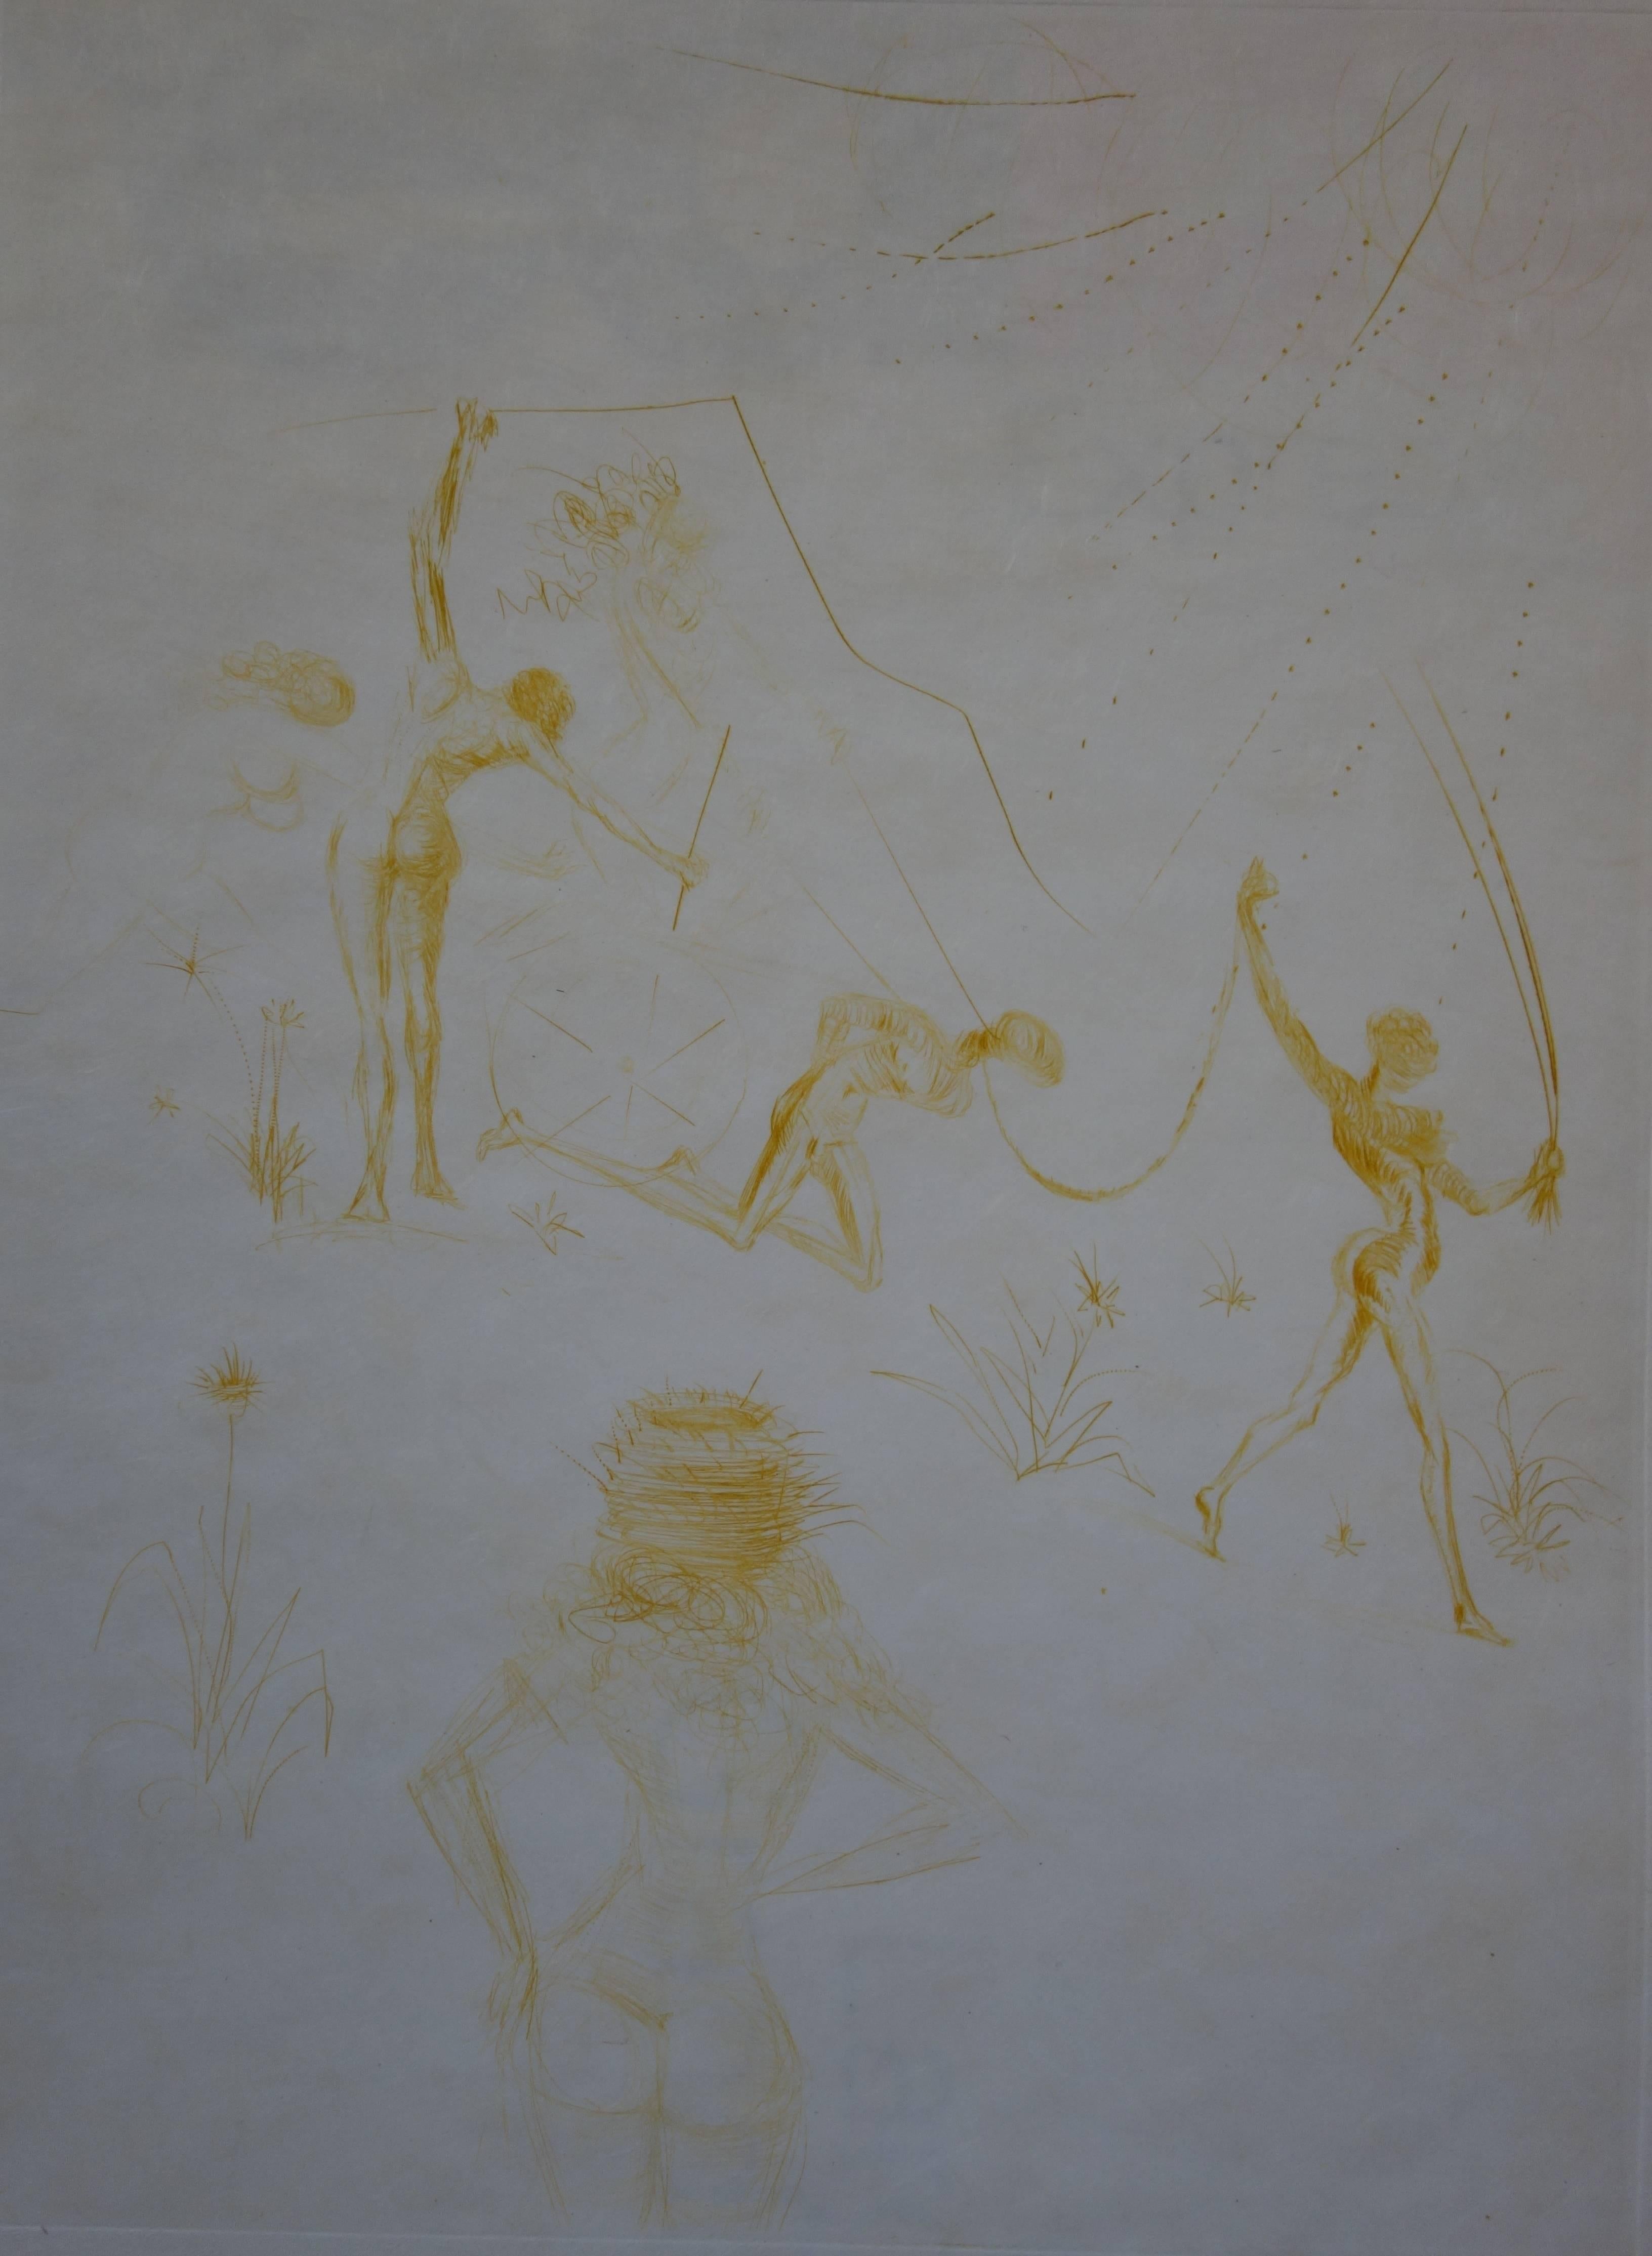 Woman looking at the slaves - Original etching - 1969 - Print by Salvador Dalí